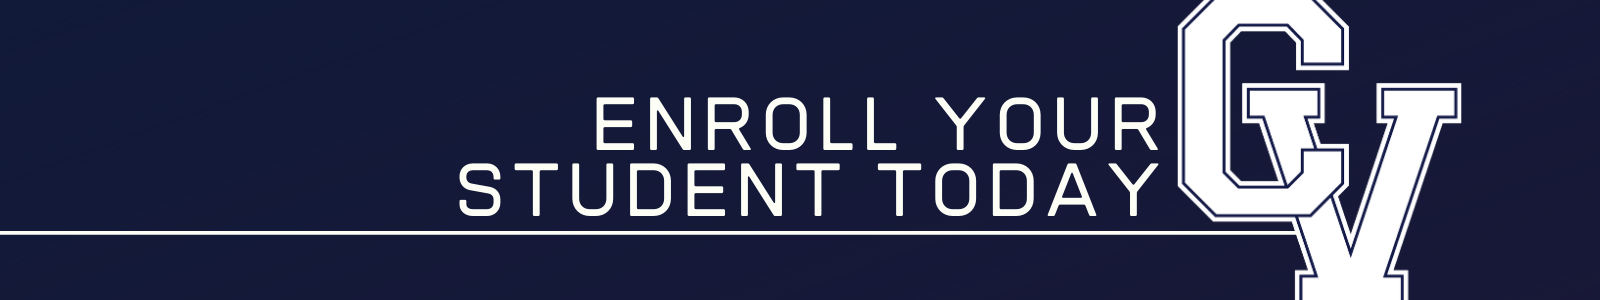 Enroll your student today